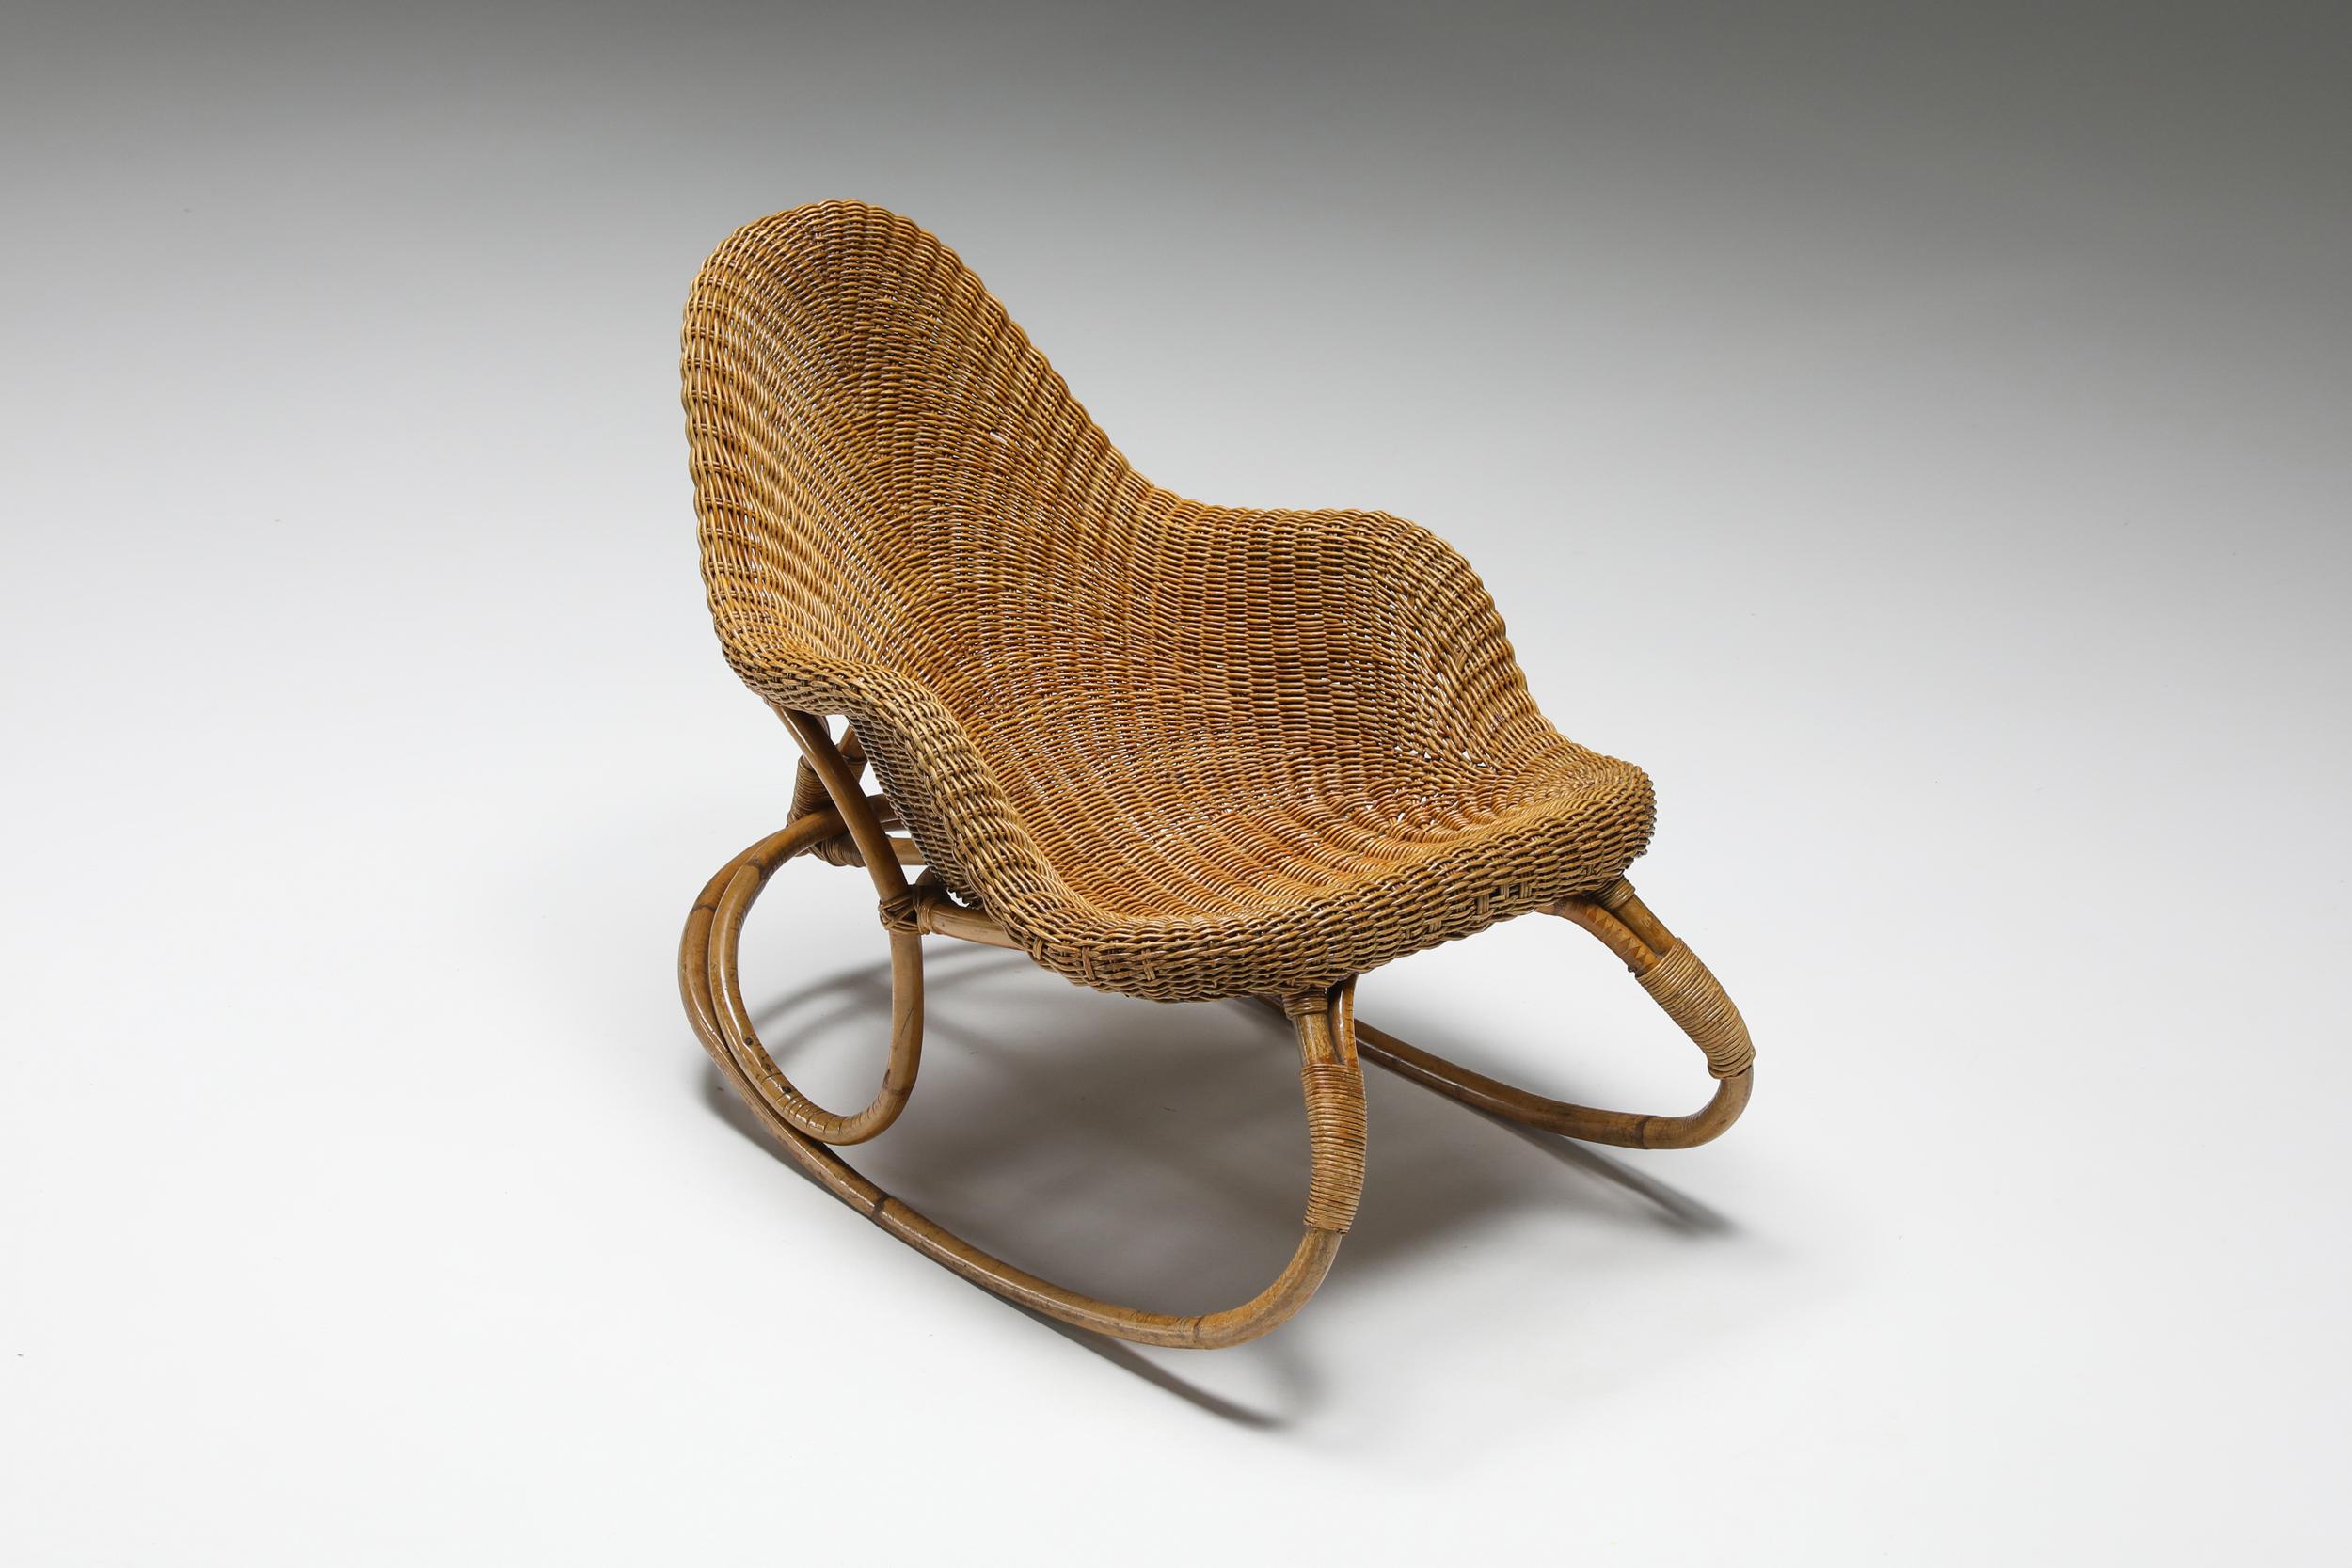 Wicker Rocking Chair Art Nouveau, France; 1905; Early 20th Century; Victor Horta

Artfully processed, combined with amazing shaped lines make this comfortable rocking chair a real impressive piece with a very unique touch. With clear influences